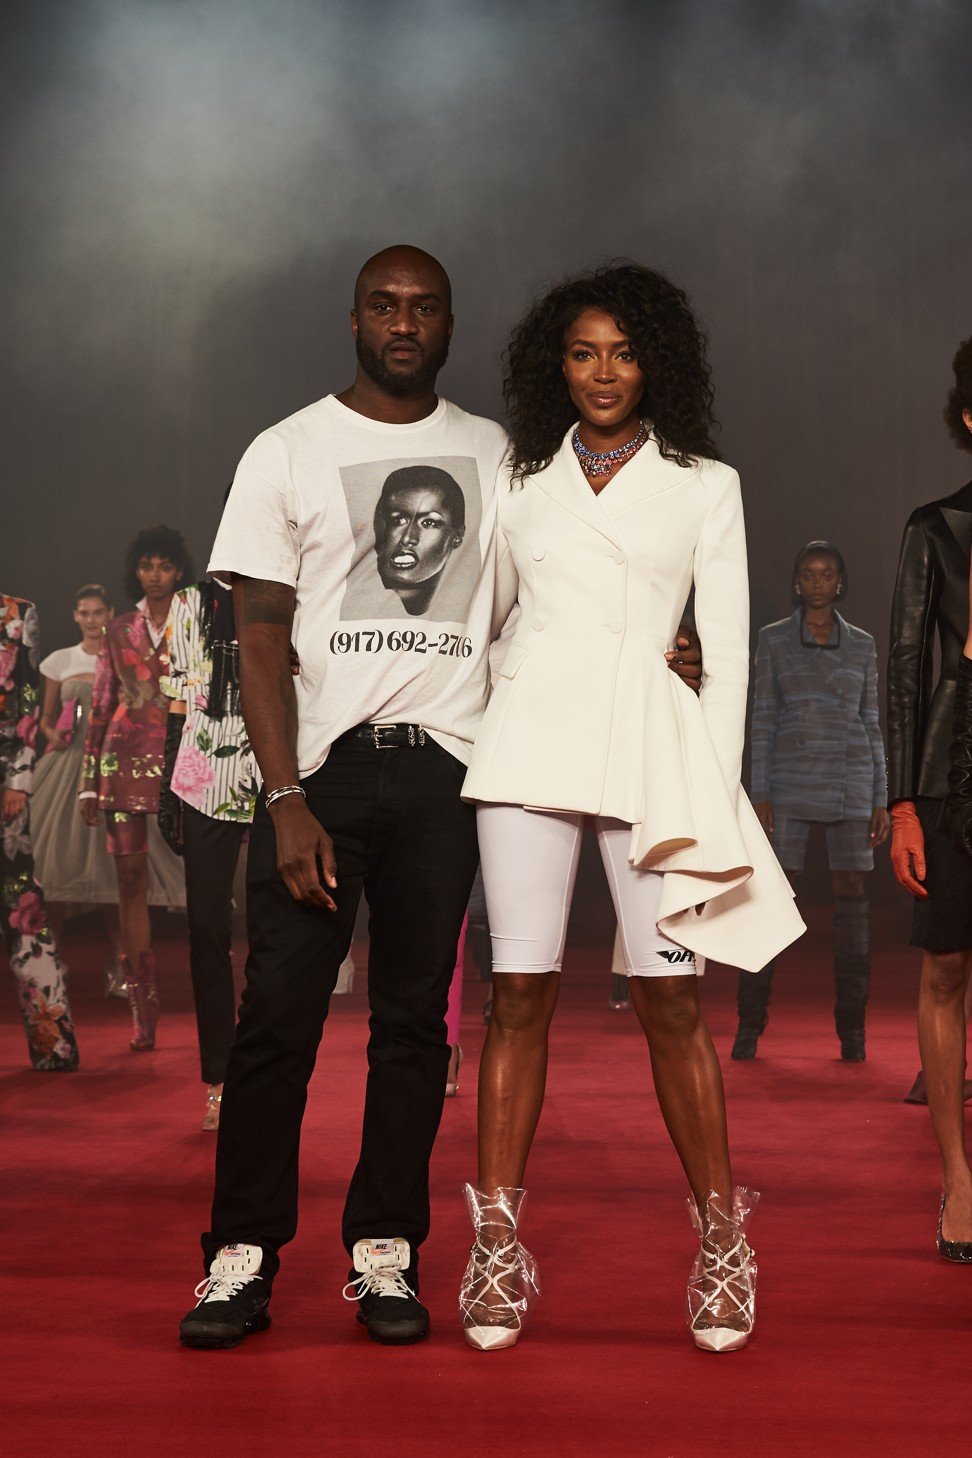 Off-White founder Virgil Abloh (left) and Naomi Campbell at the finale of Off-White’s spring/summer 2018 show. Campbell’s shoes are made in collaboration with Jimmy Choo.